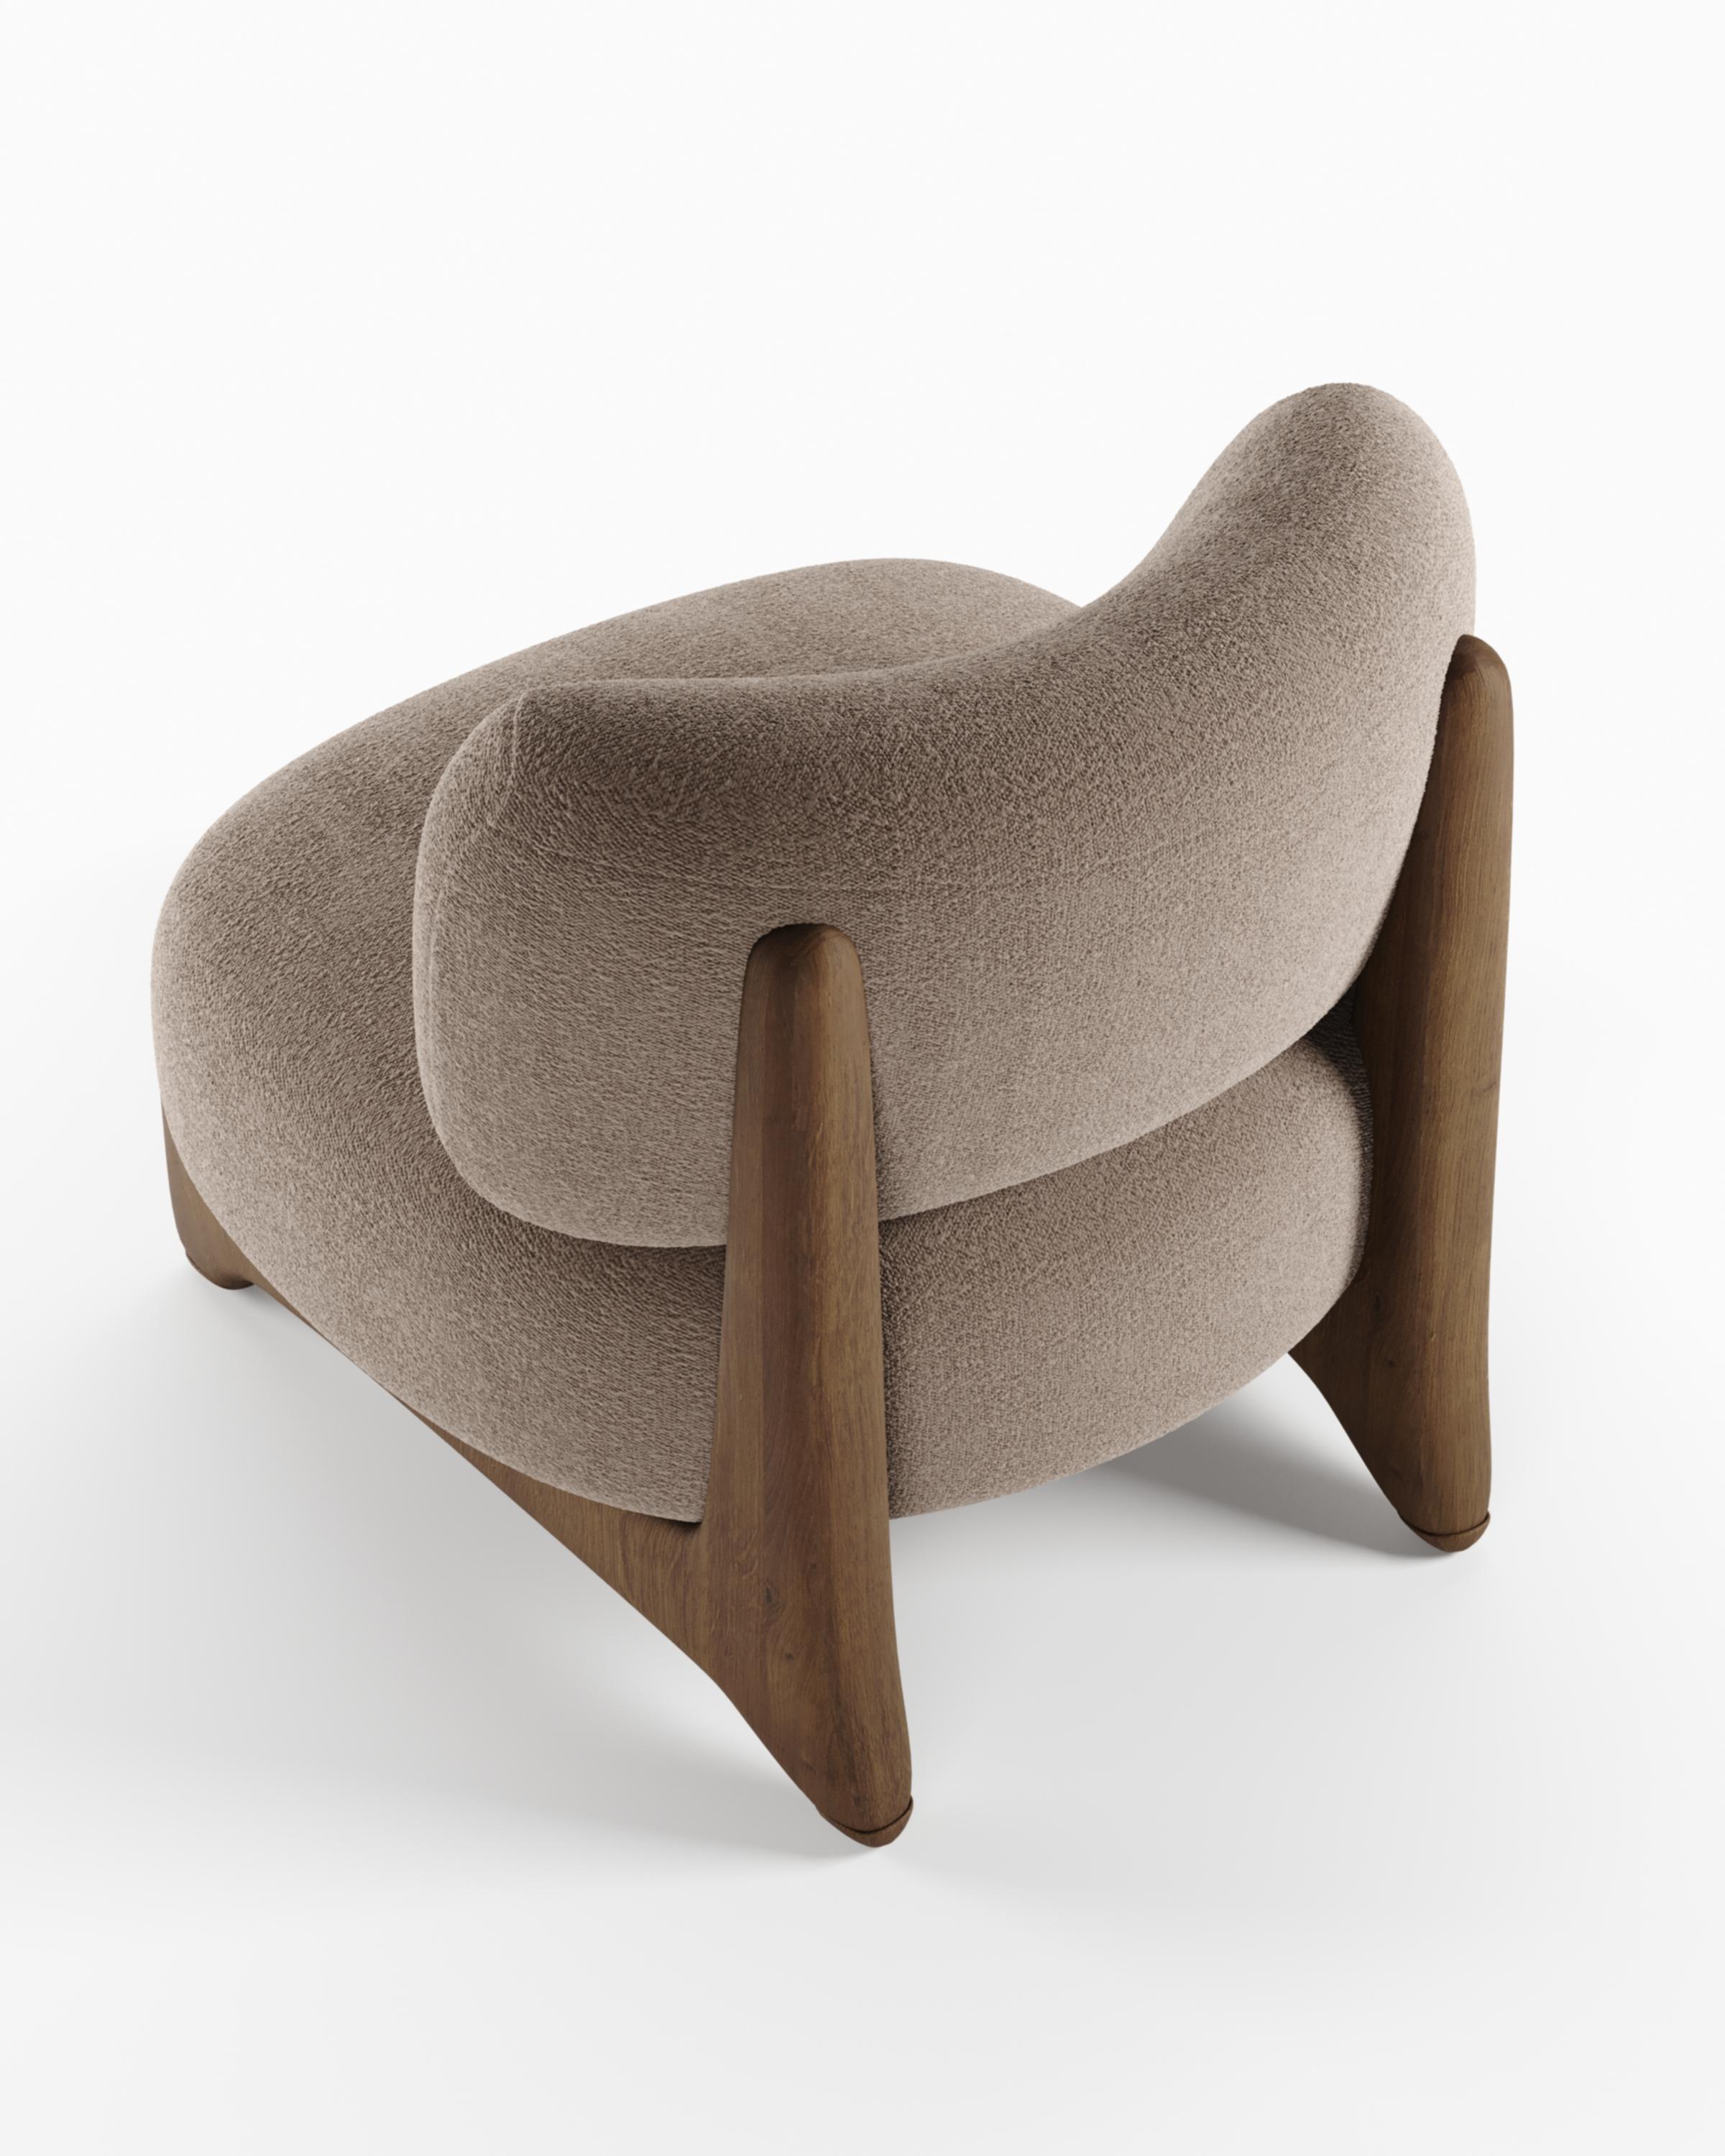 Contemporary modern tobo armchair in fabric & oak wood by Alter Ego for Collector Studio.

Underpinned by a minimalist and sophistication aesthetic of clean lines.

Dimensions
W 70 cm 27,6”
D 70 cm 27,6”
H 73 cm 28”
SH 40 cm 15,7”

Product